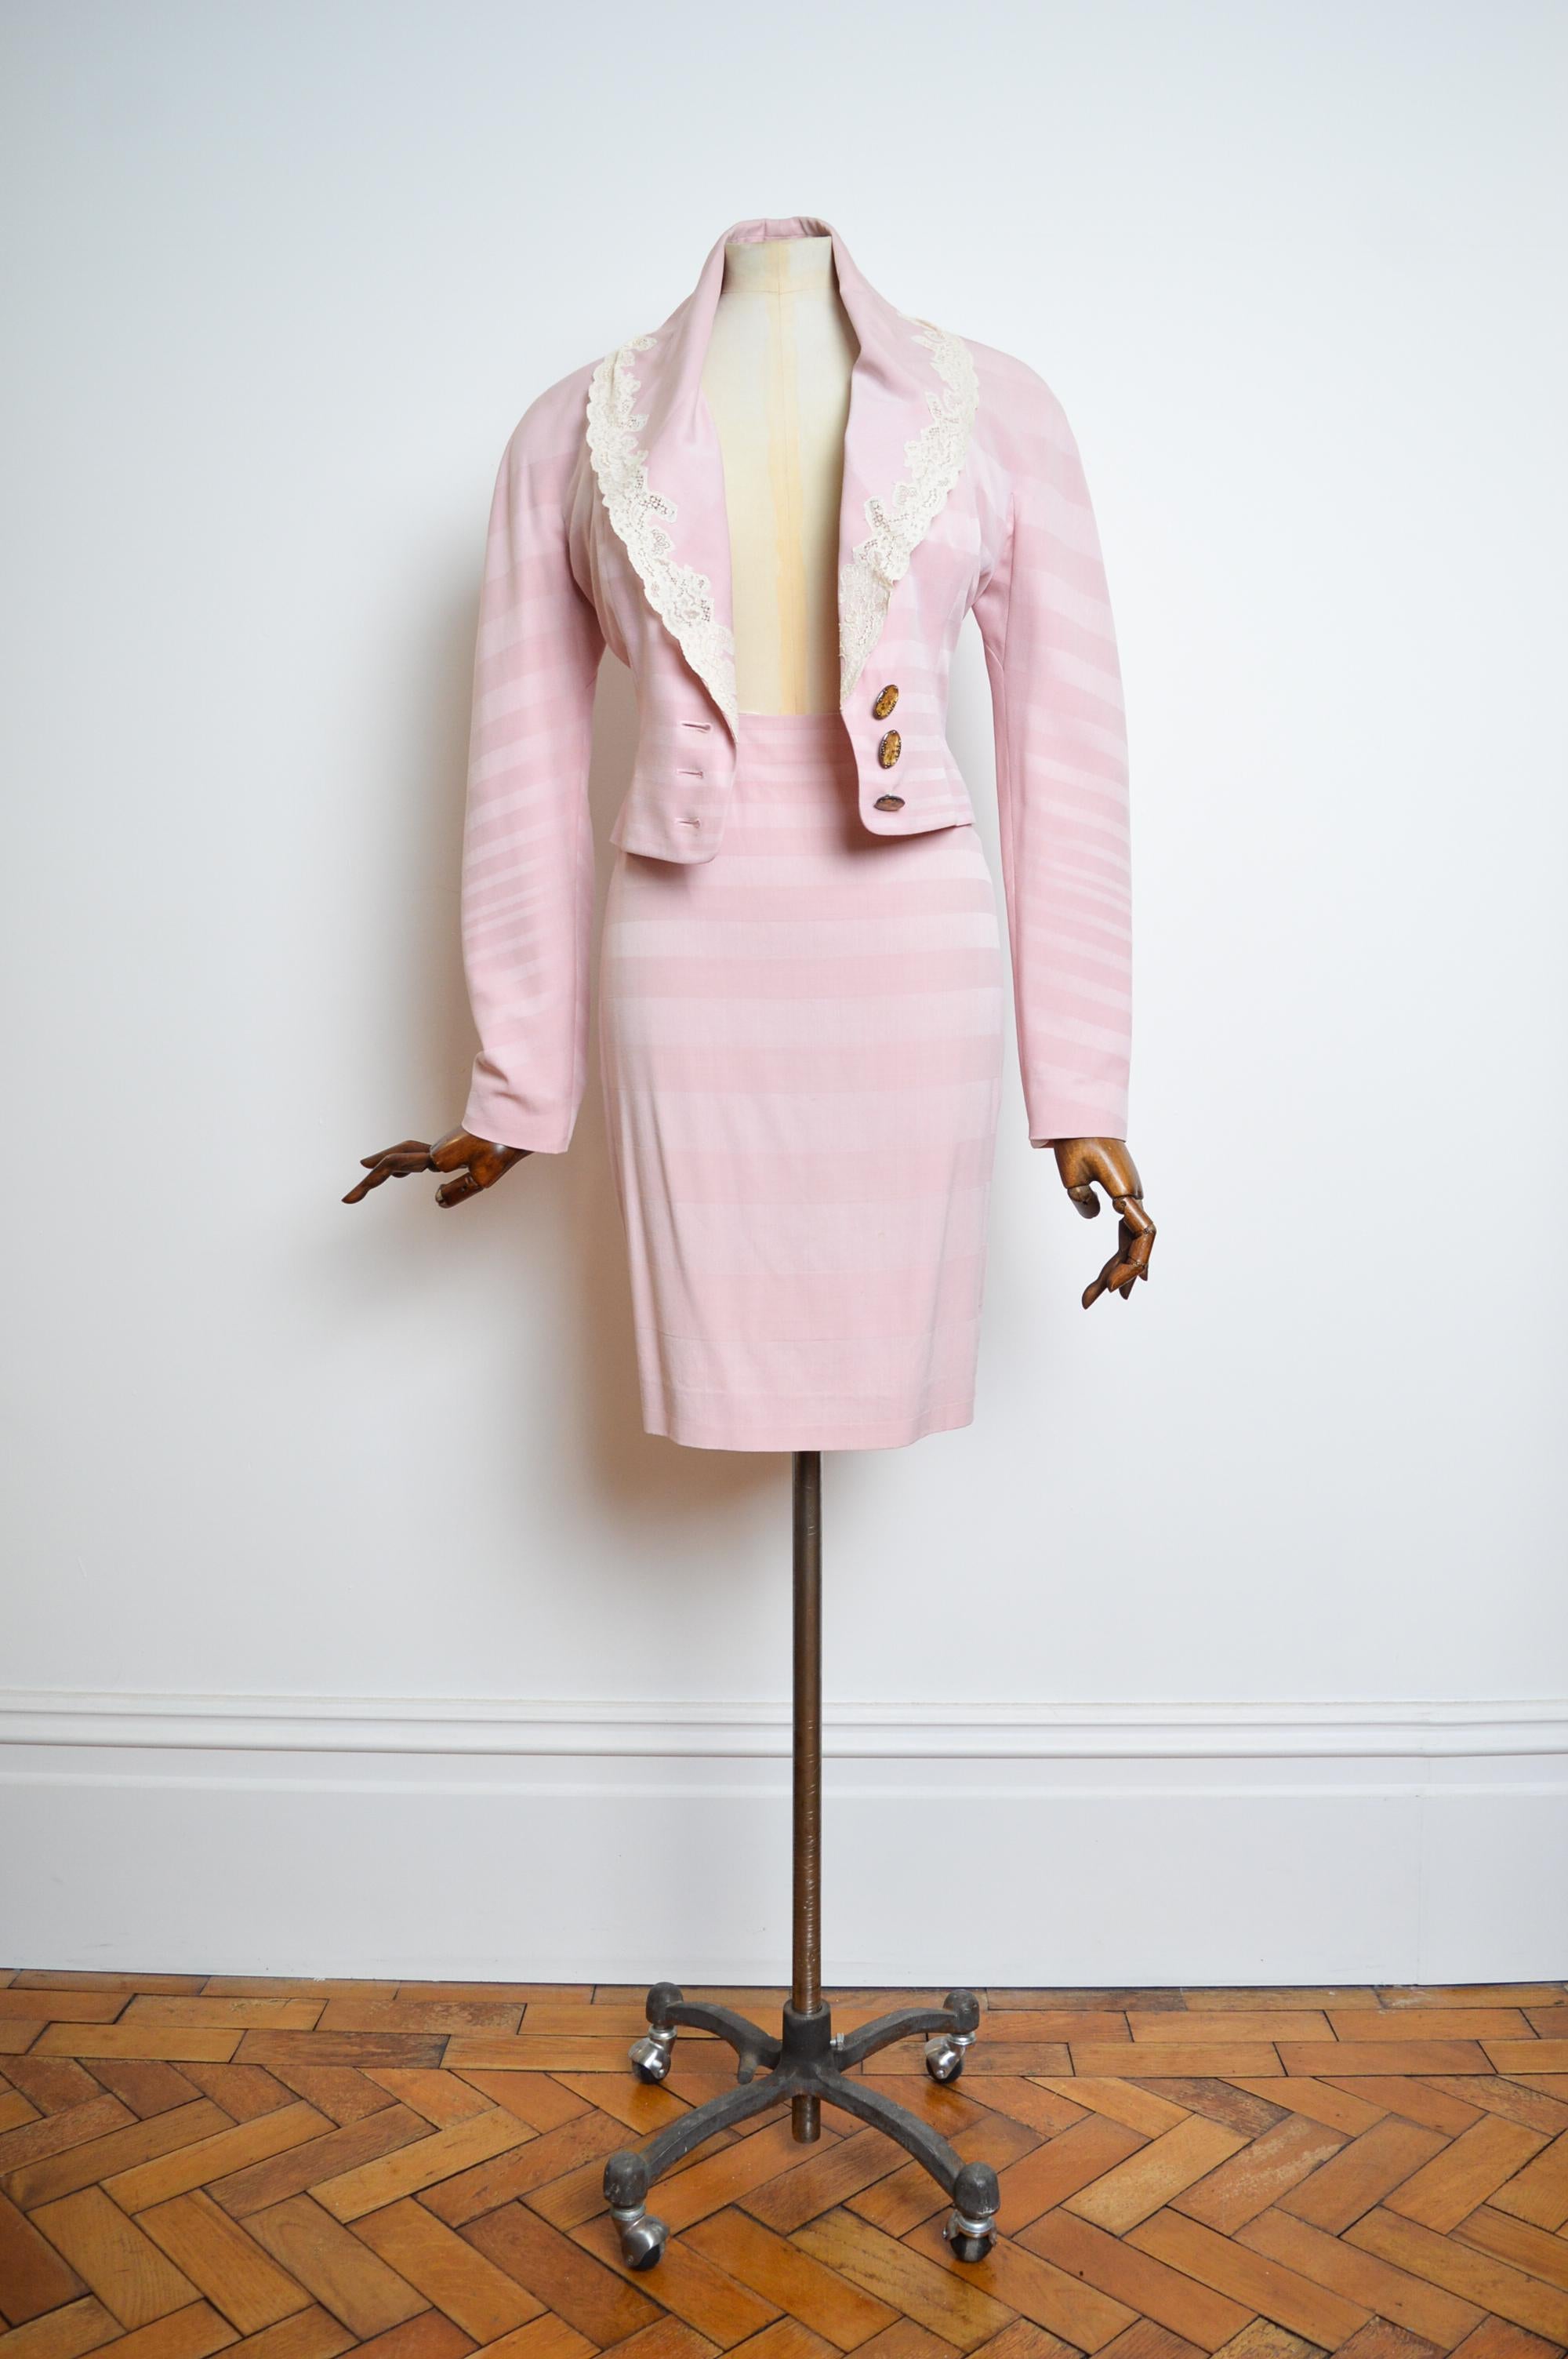 A/W 1999 Christian Dior by John Galliano Pink Lace Jacket & Pencil Skirt set 11